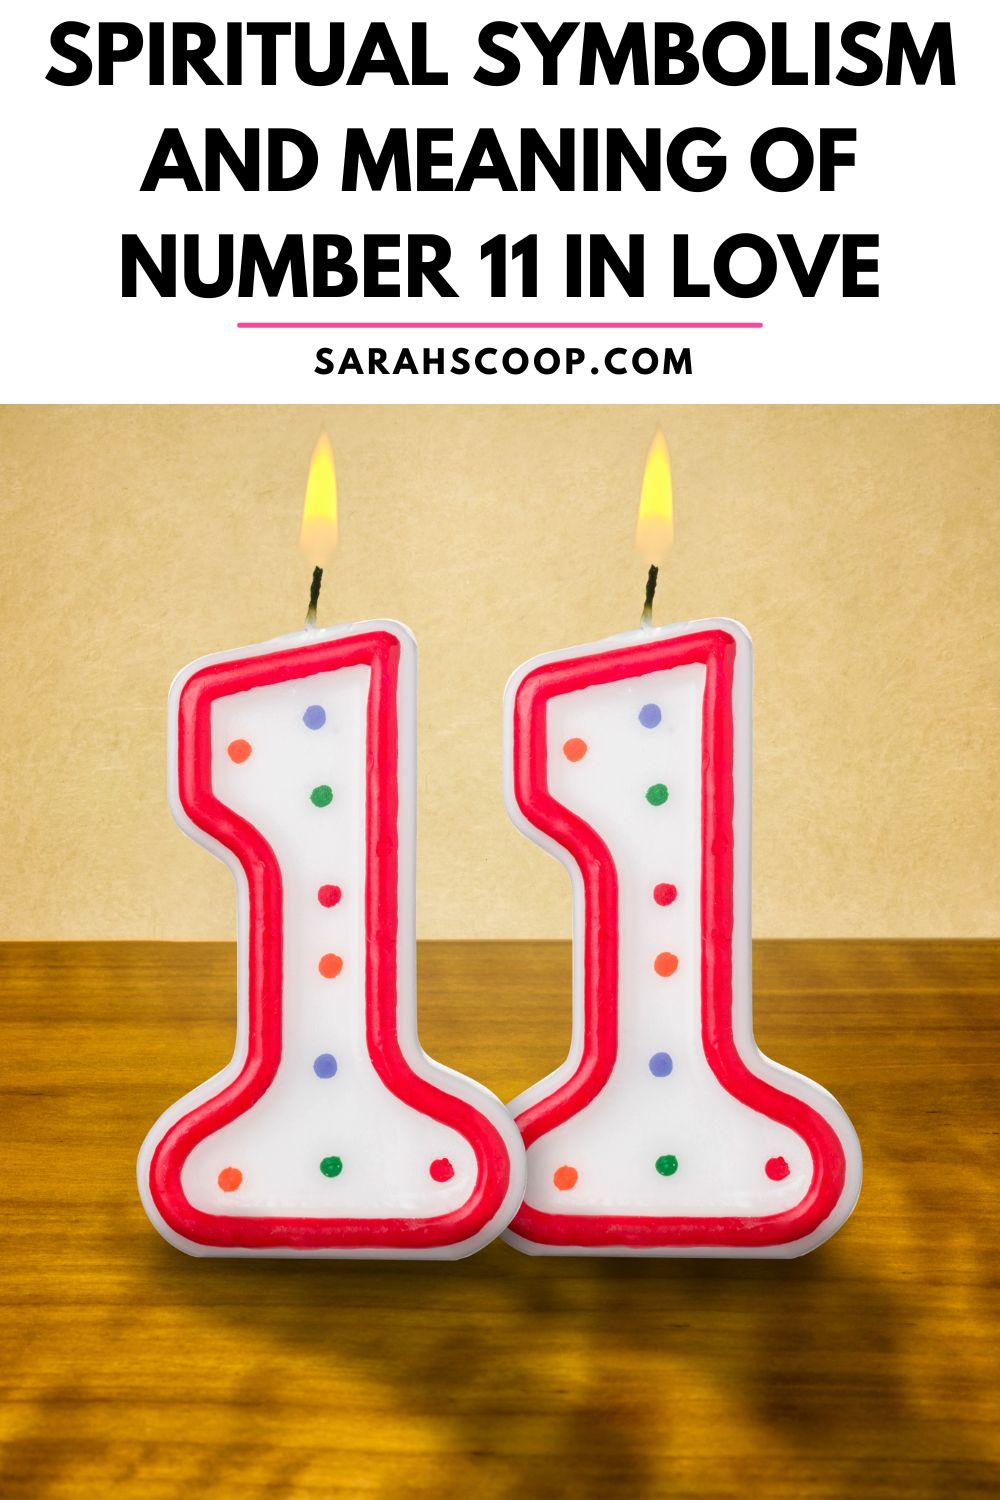 What is number 11 in love?